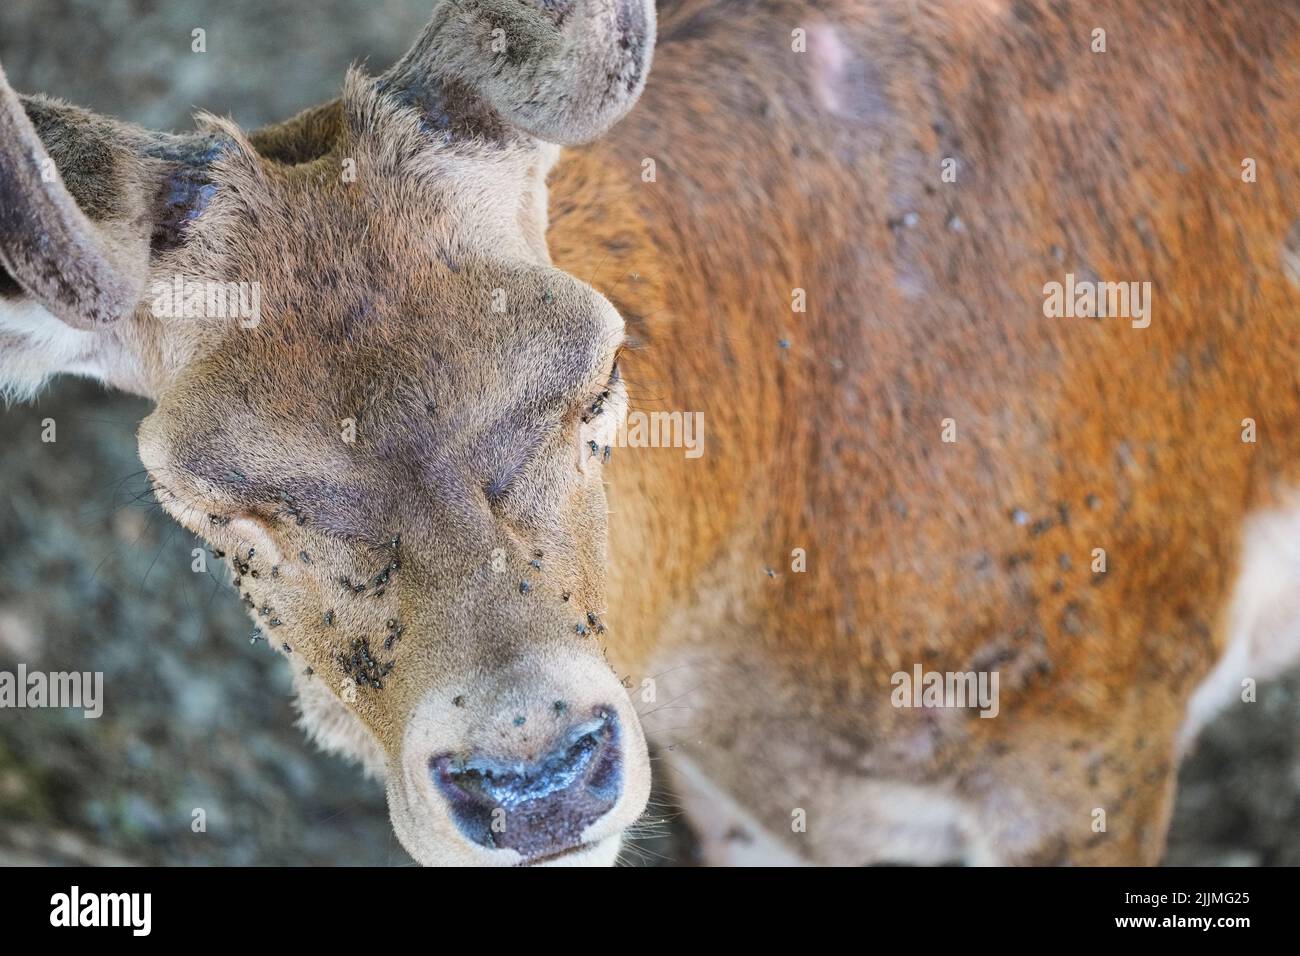 A closeup shot of a sick deer with a swarm of flies on its face Stock Photo